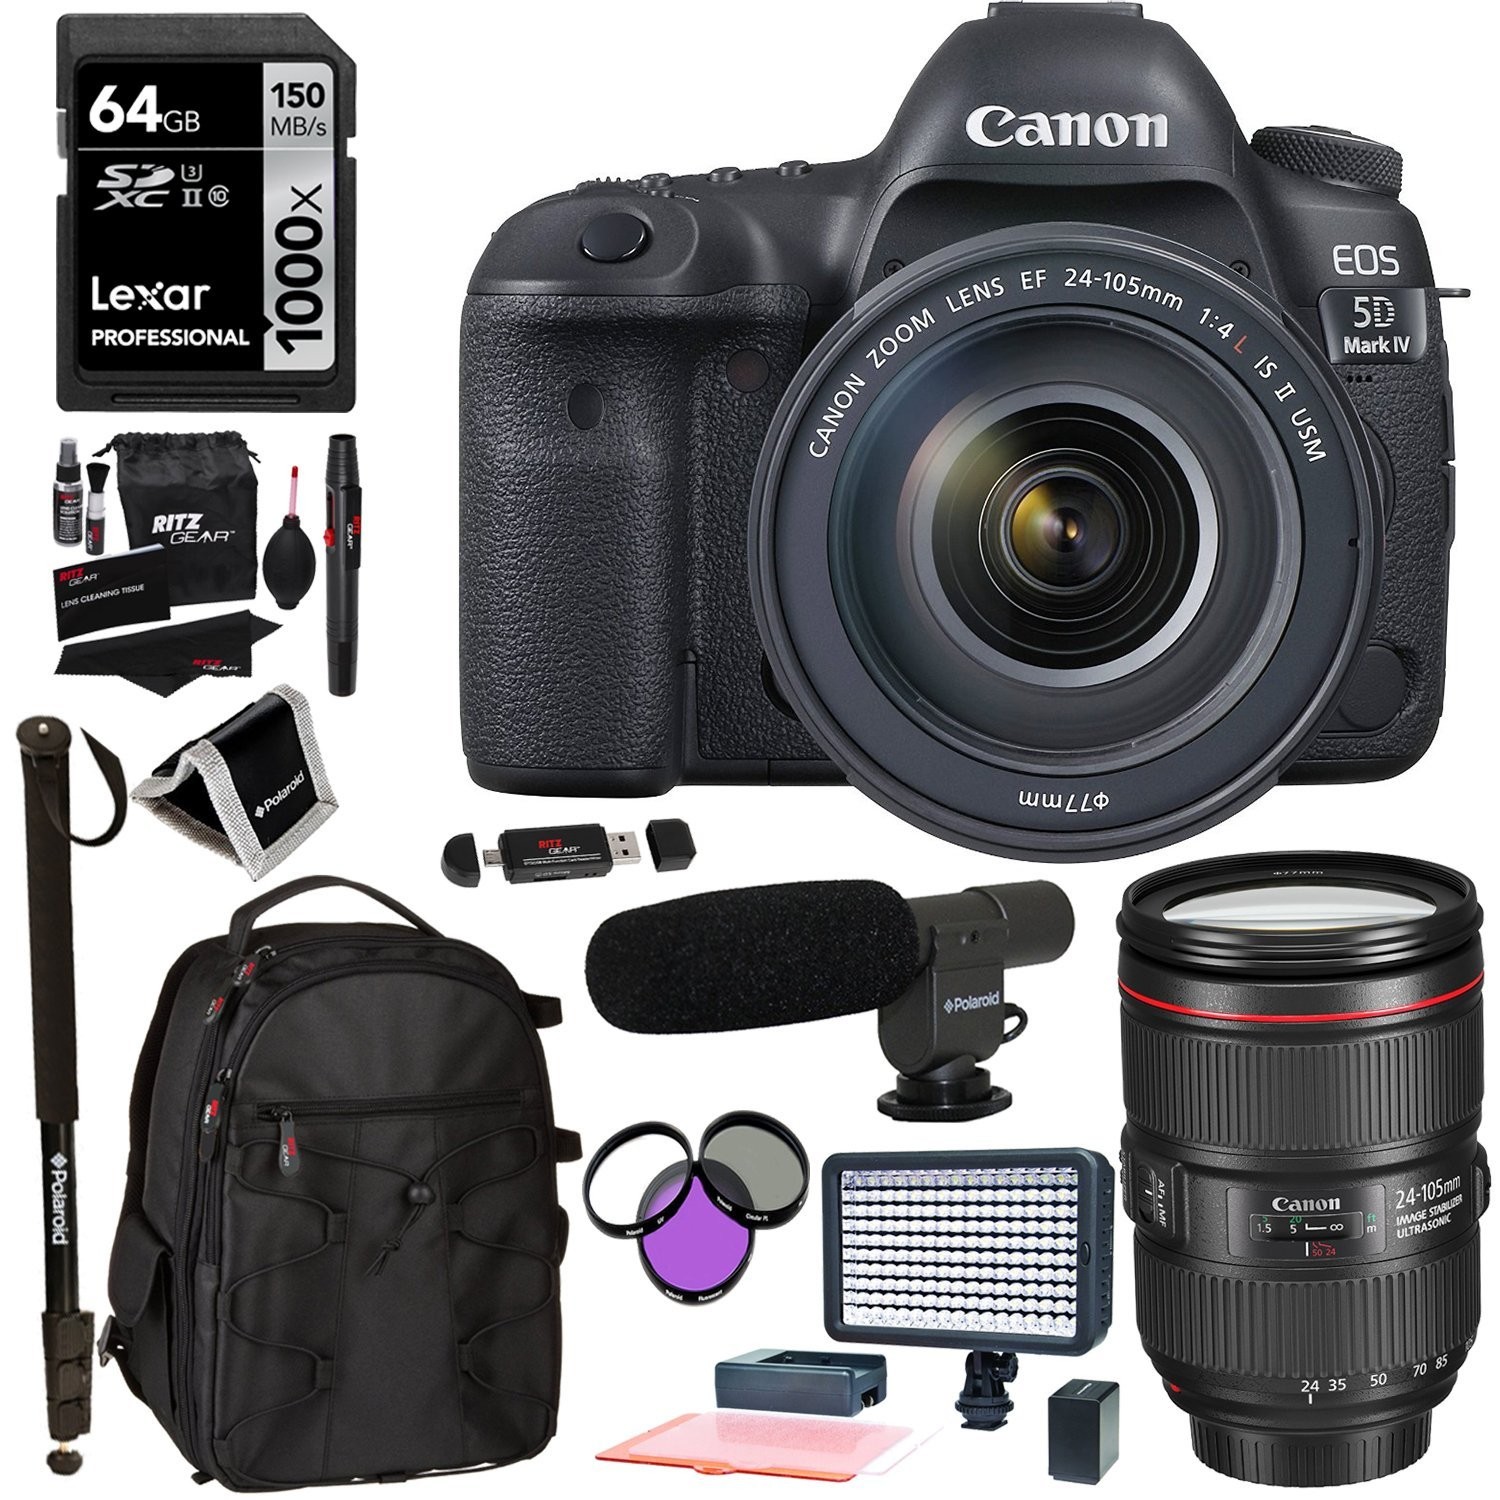 Canon EOS 5D Mark IV DSLR with 24-105mm Lens and Video Kit - image 1 of 1